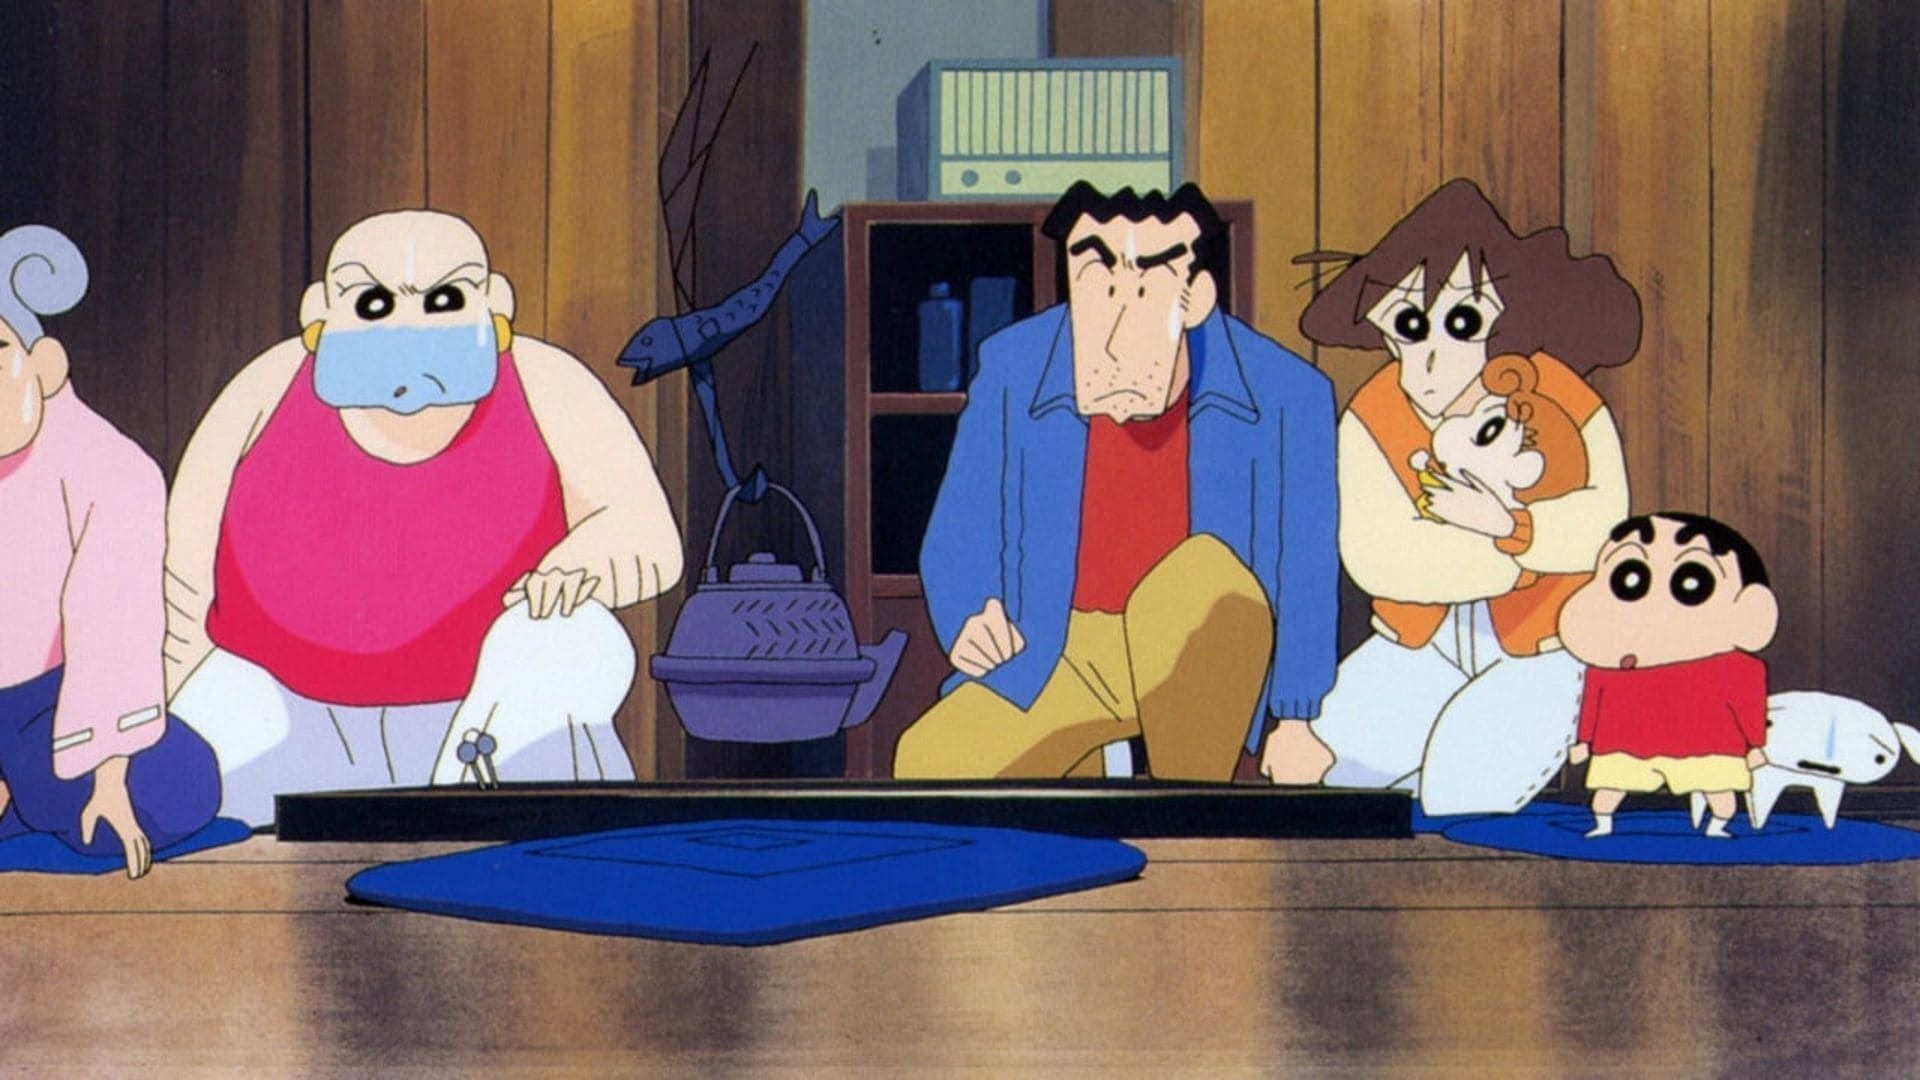 Cover image of Crayon Shin-chan: Pursuit of the Balls of Darkness